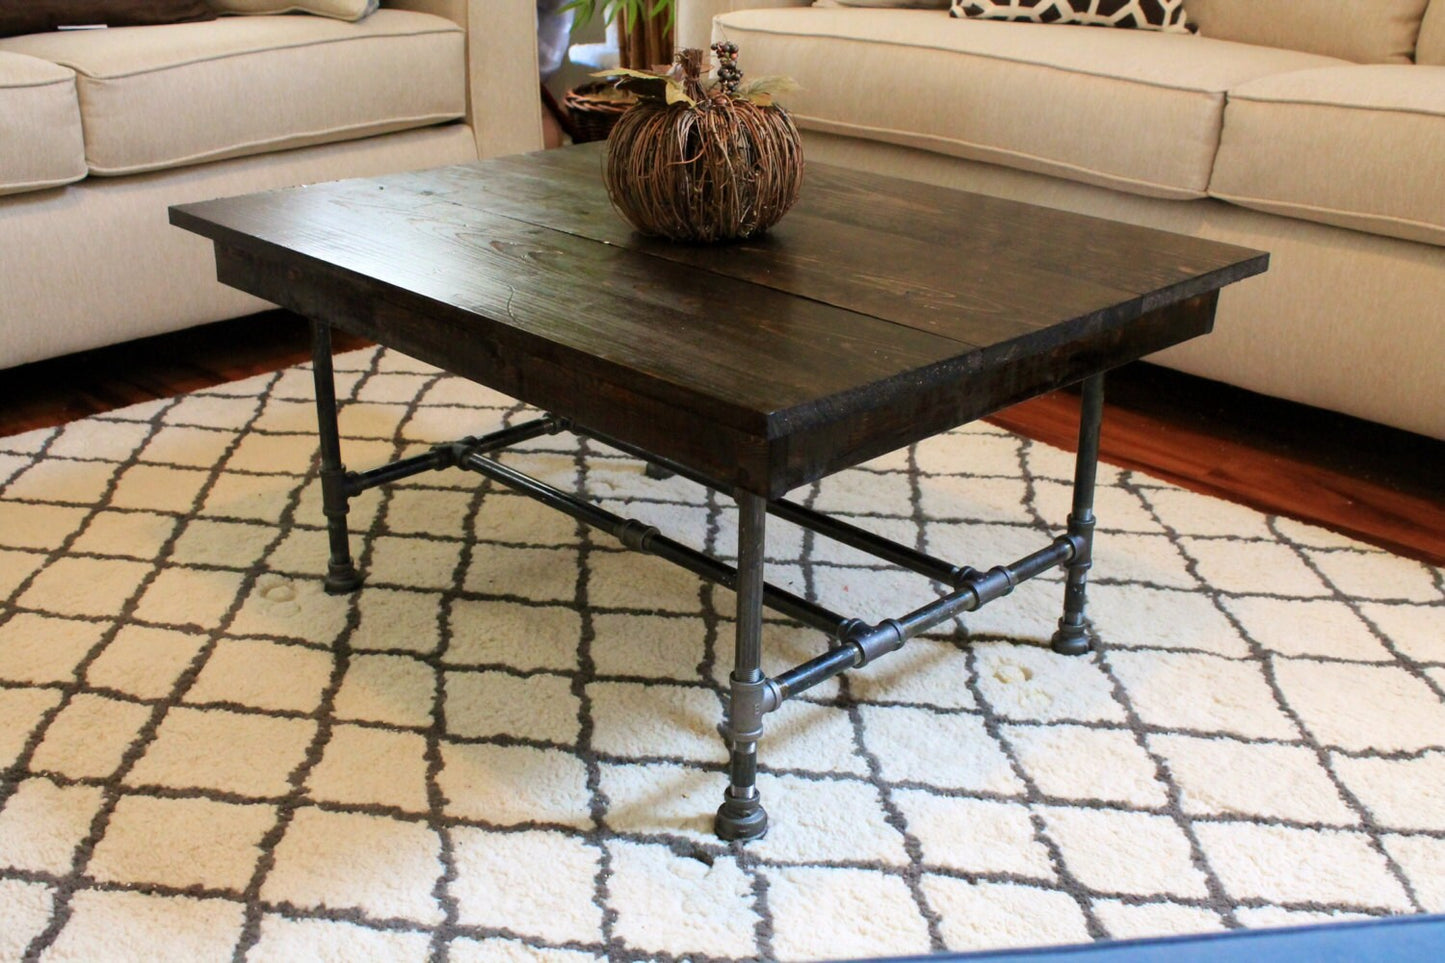 Steel and Pine Wood Coffee Table